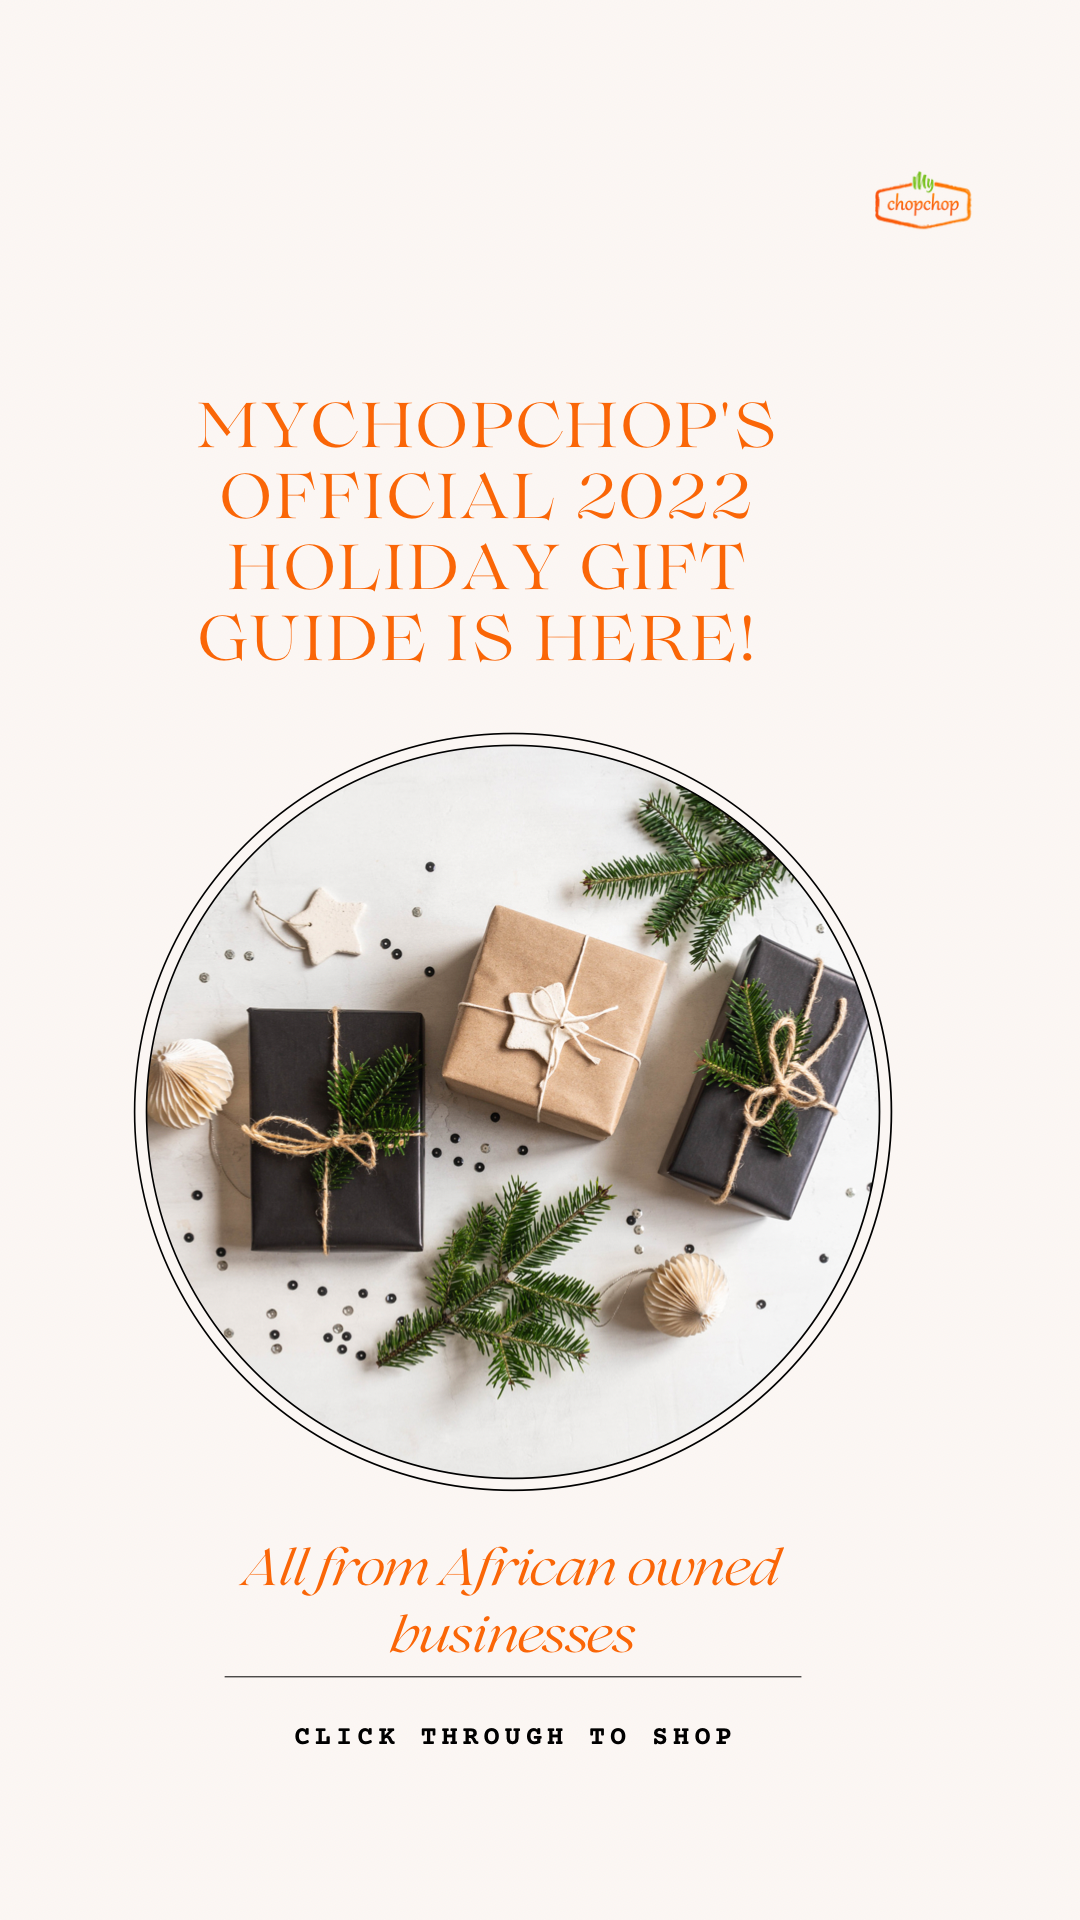 Mychopchop's 2022 Official Gift guide - All African-owned businesses